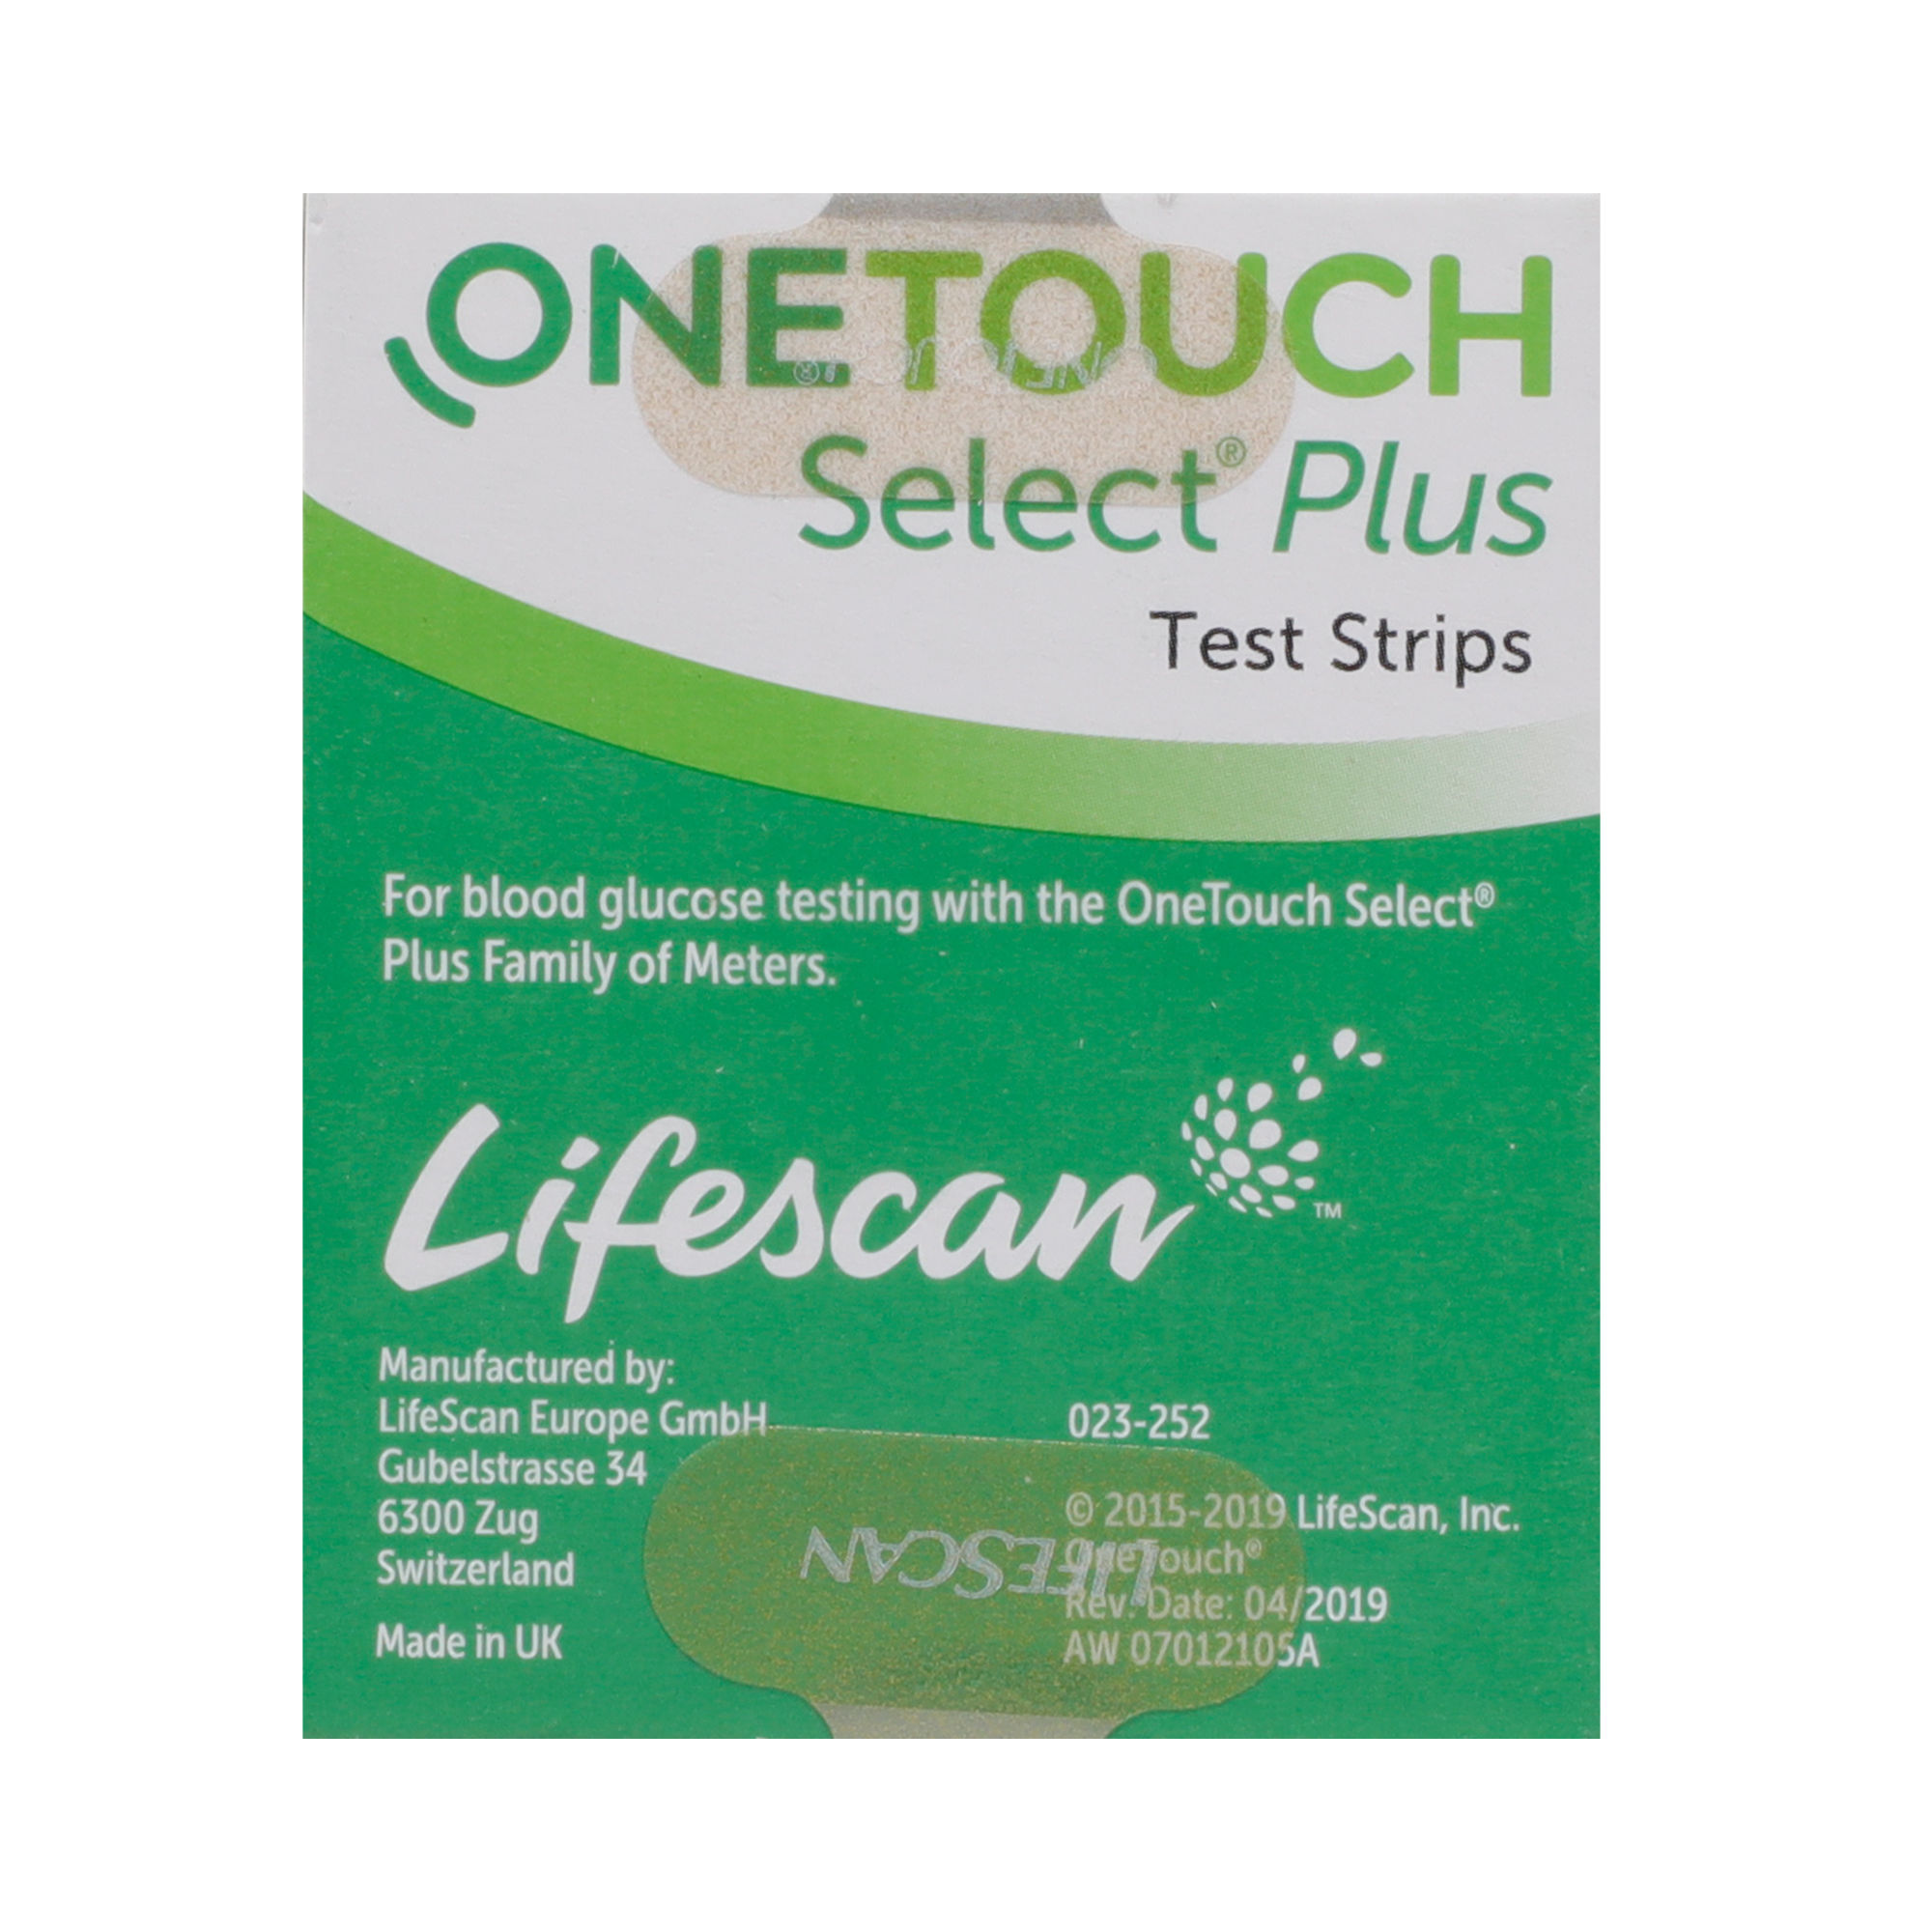 OneTouch Select Plus Test Strips, 50 Count, Pack of 1 